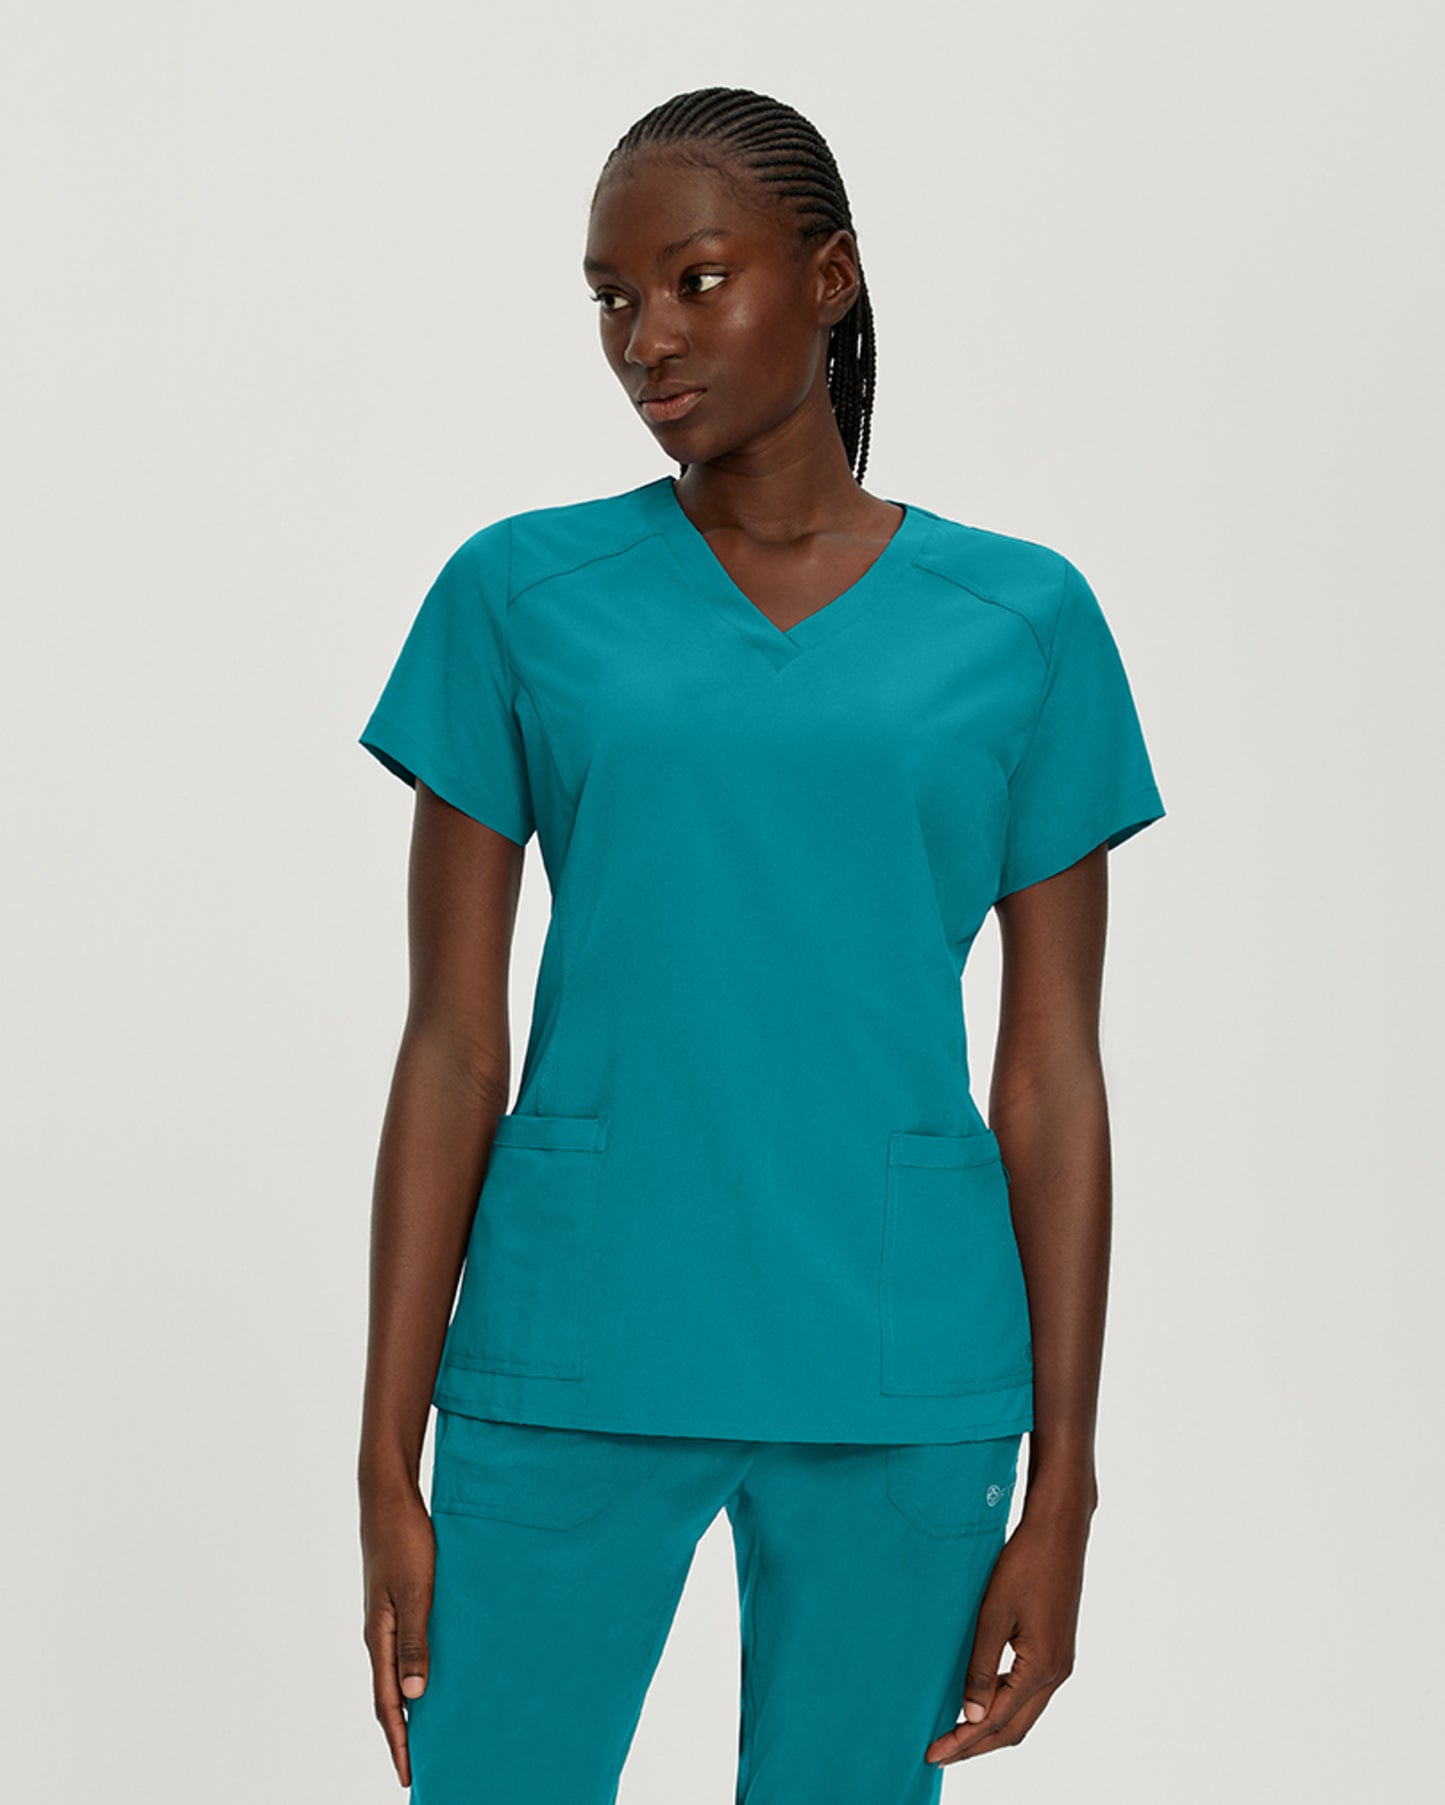 785 White Cross FIT V-Neck Women's Scrub Top (Real Teal)